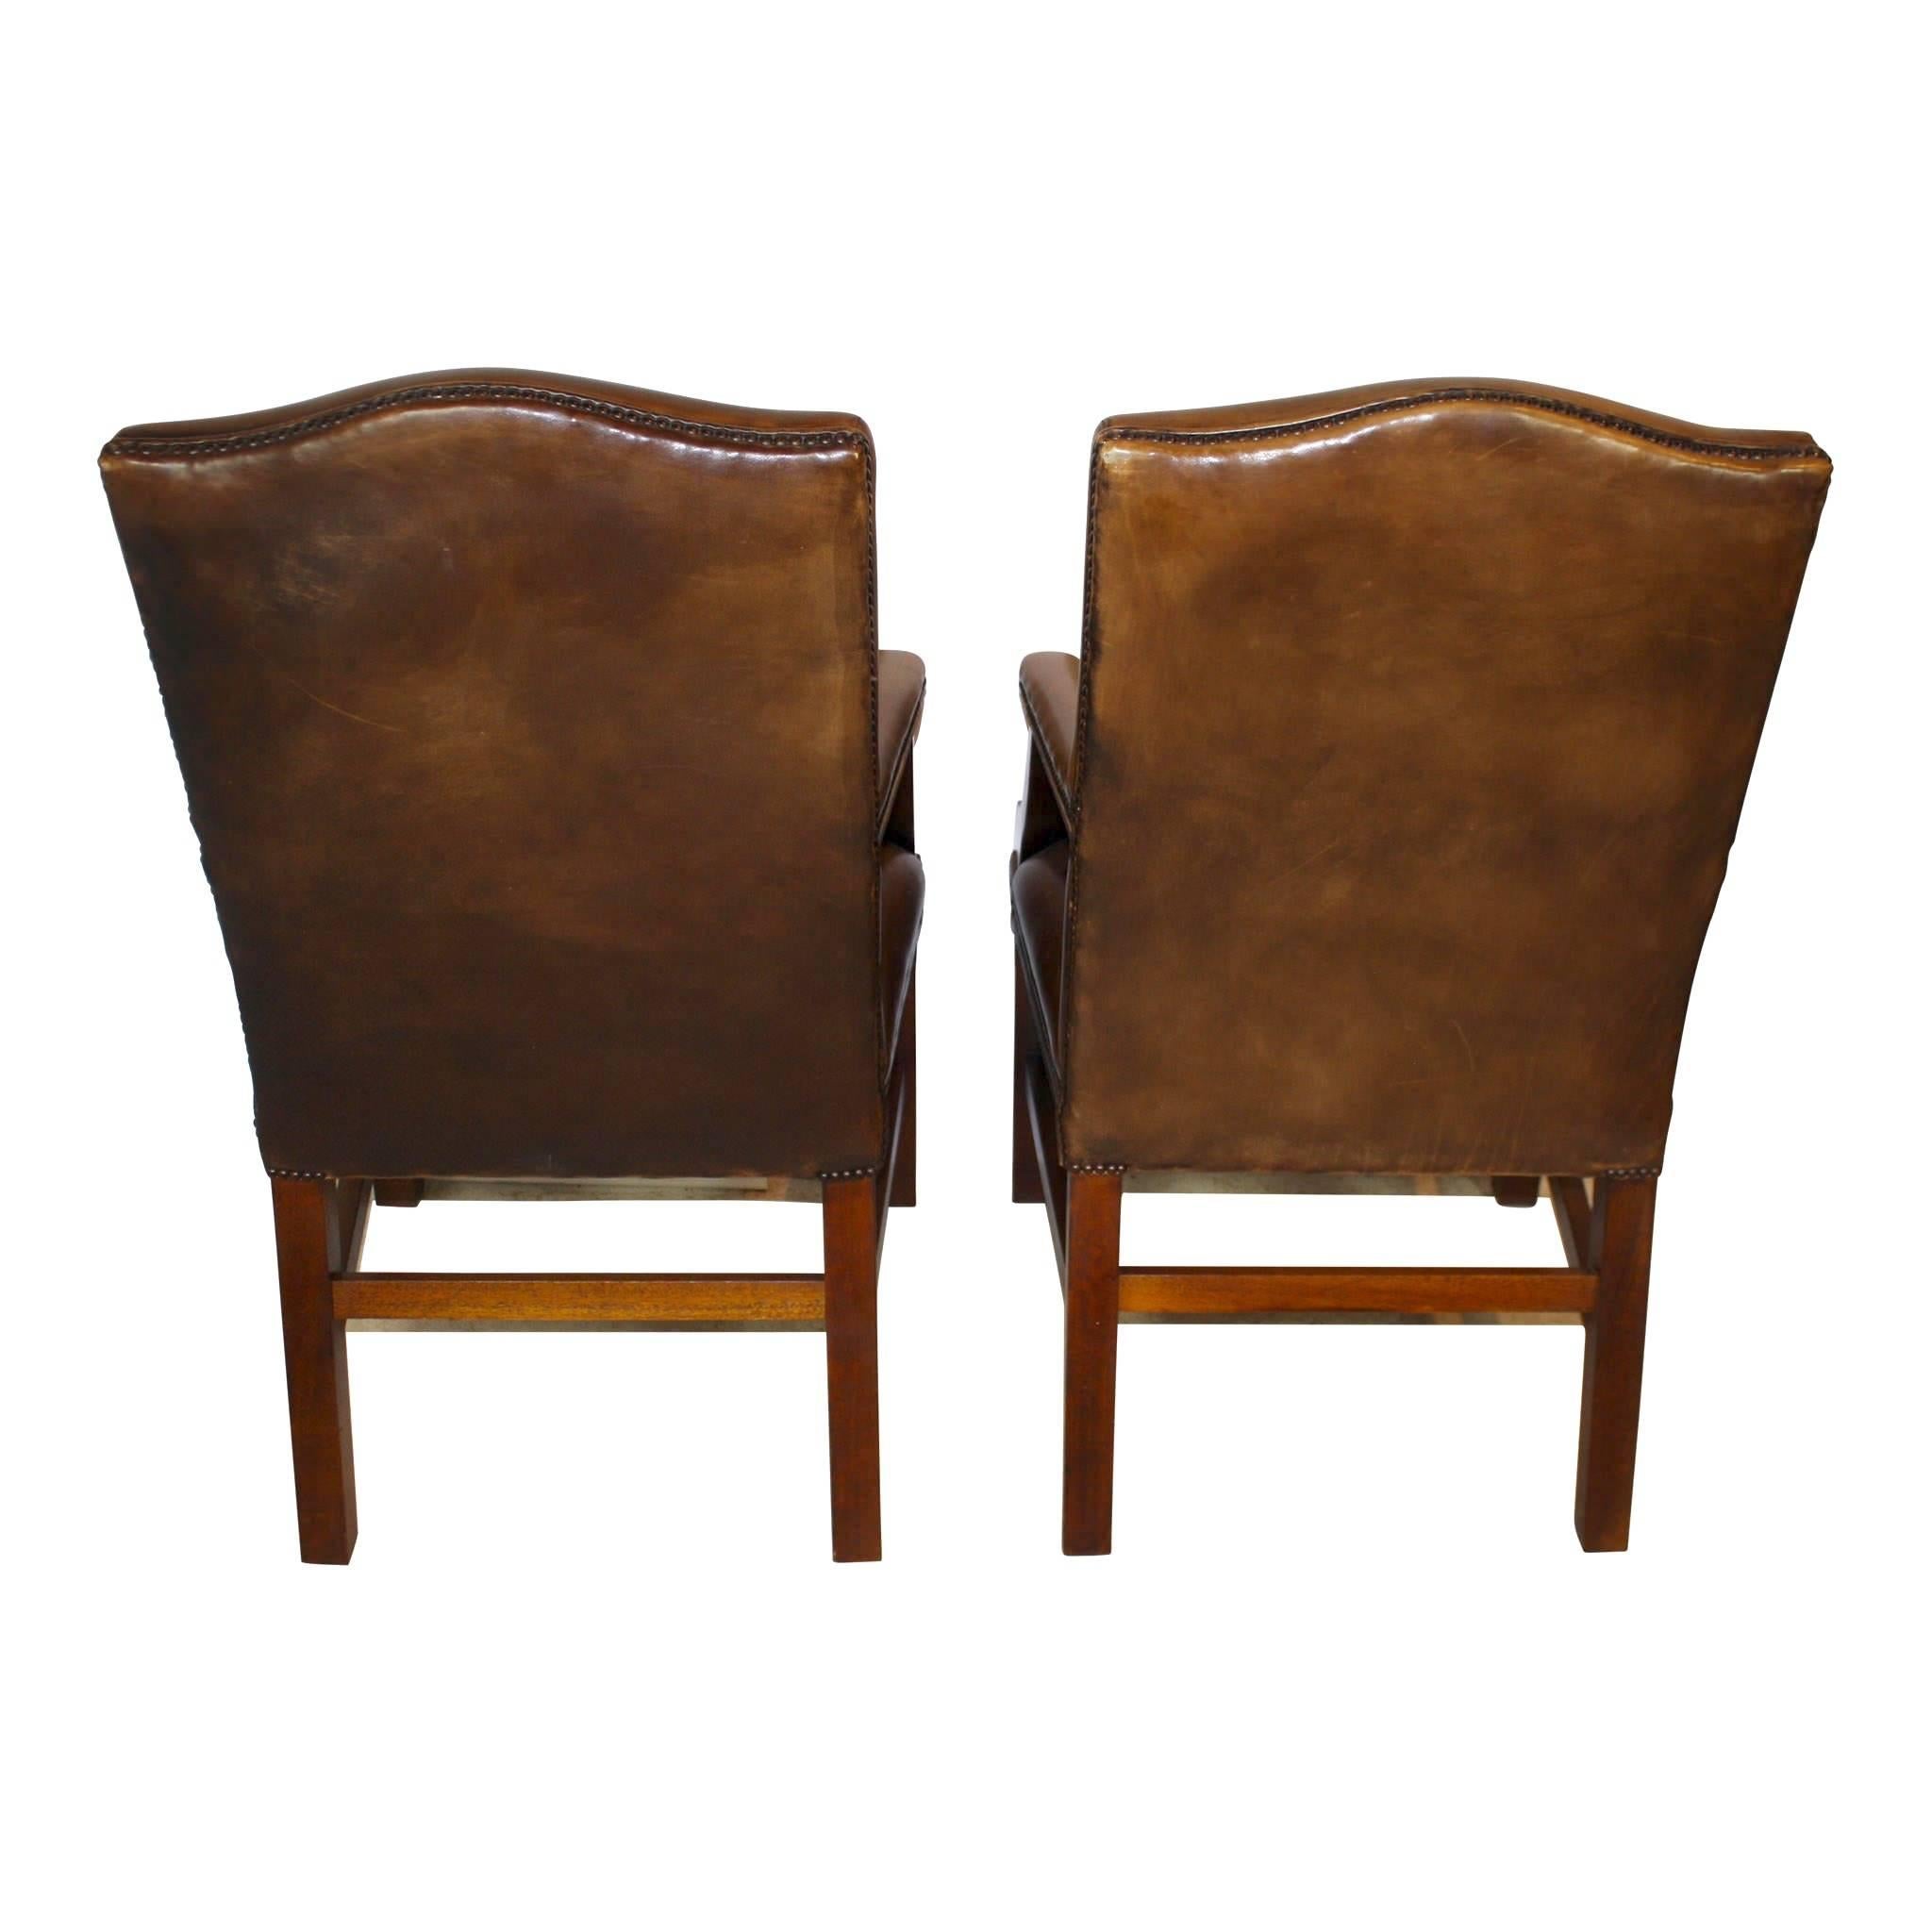 Arts and Crafts Early 20th Century English Arched Back Leather Armchairs